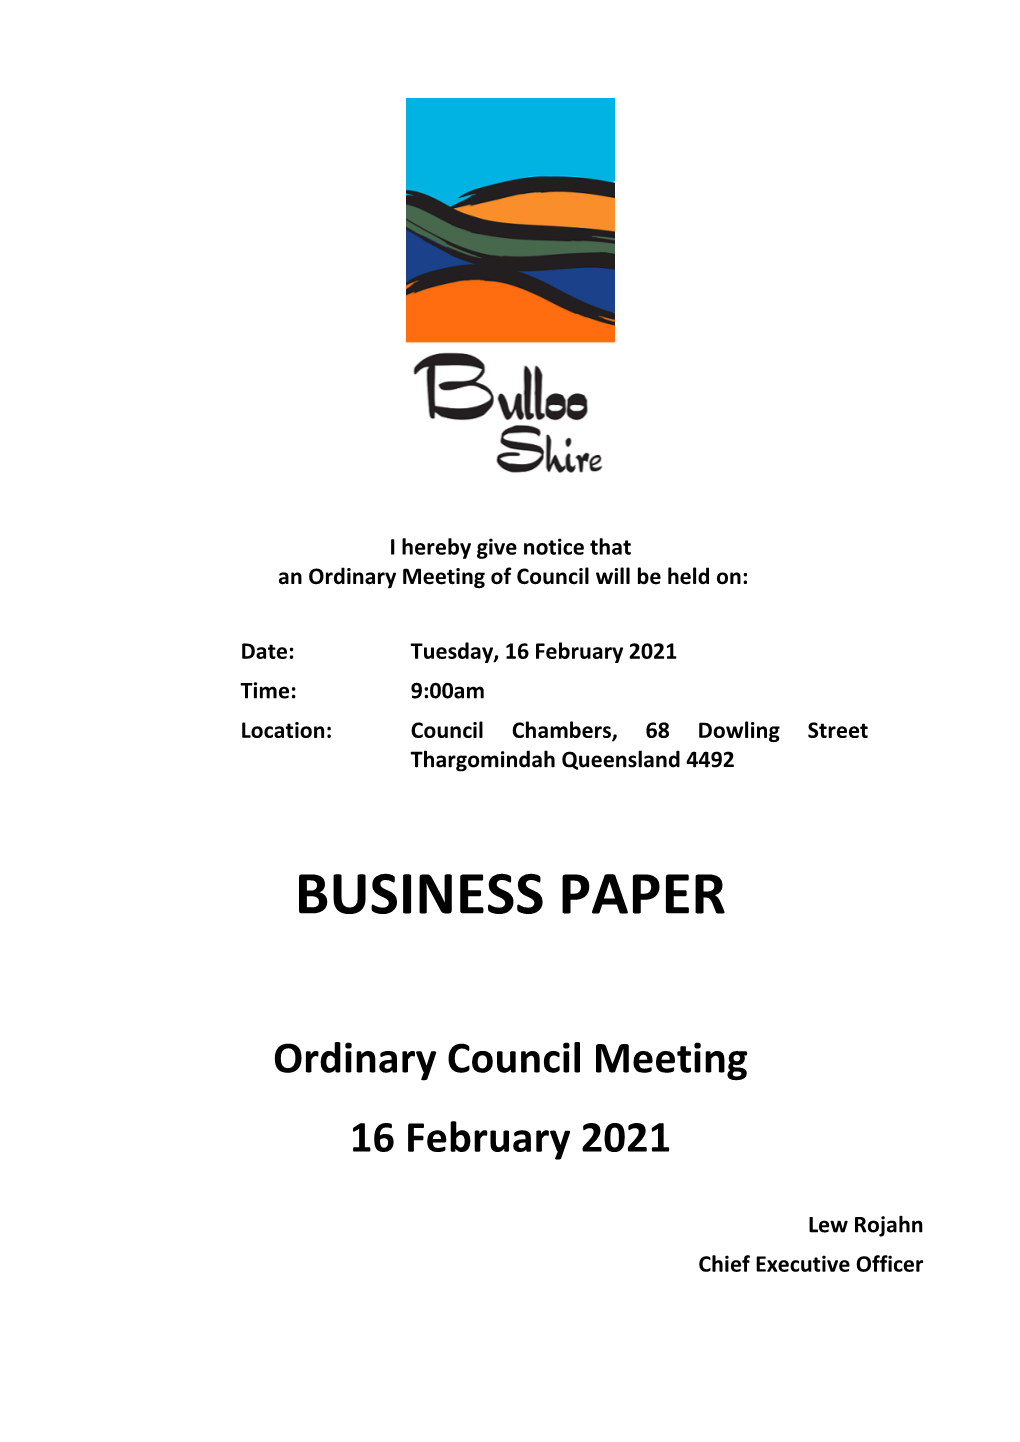 16 February 2021 Time: 9:00Am Location: Council Chambers, 68 Dowling Street Thargomindah Queensland 4492